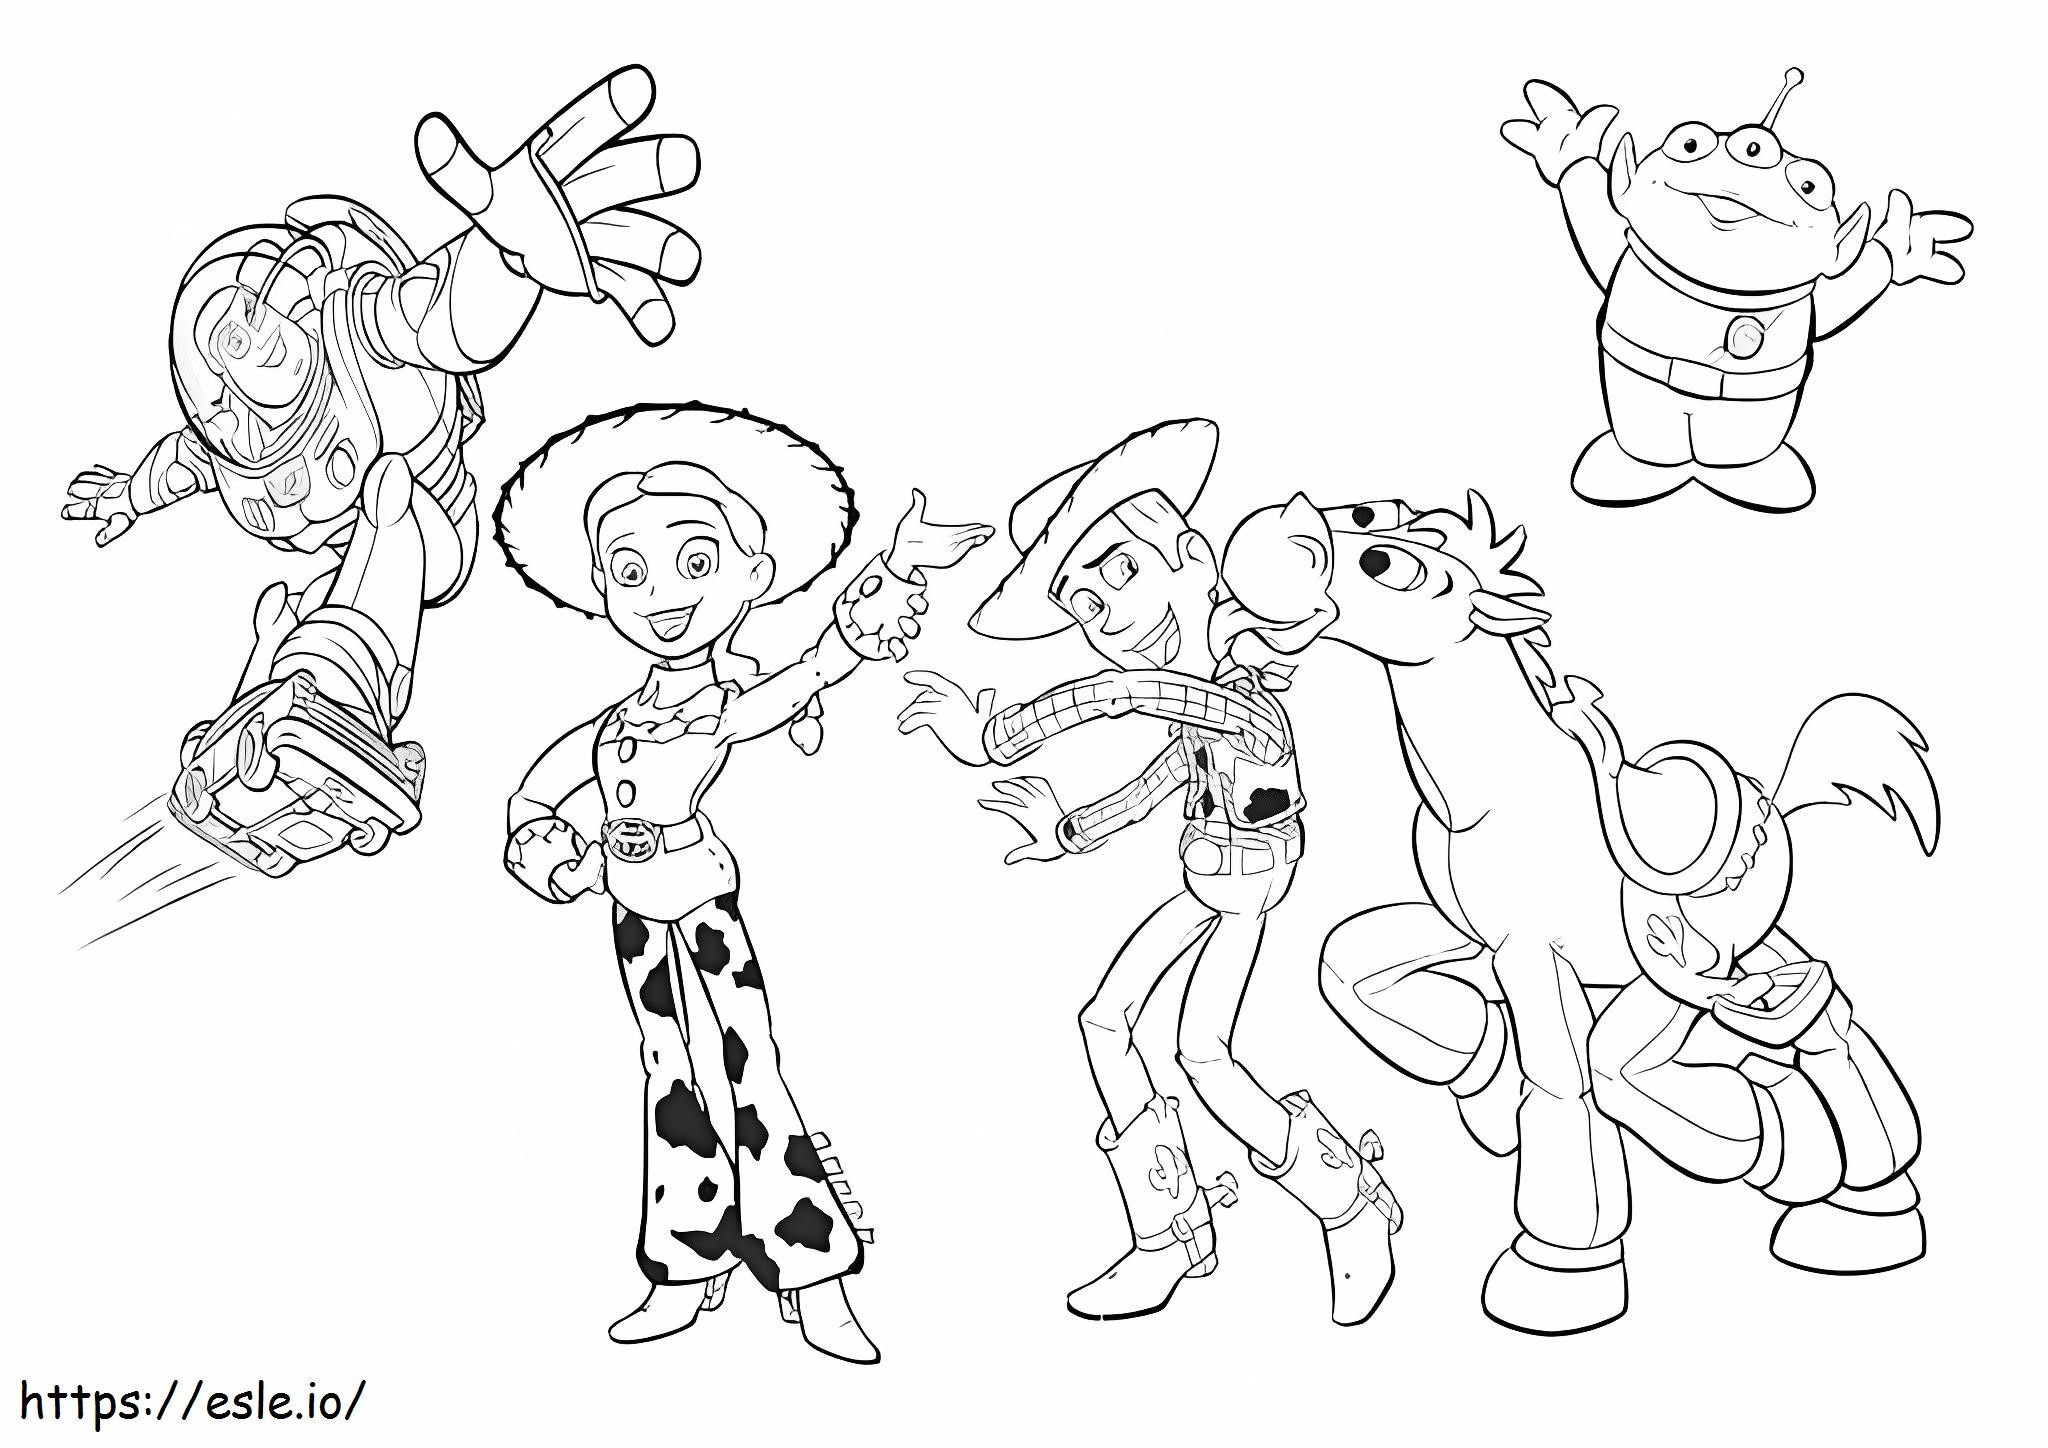 Diana And Friend coloring page